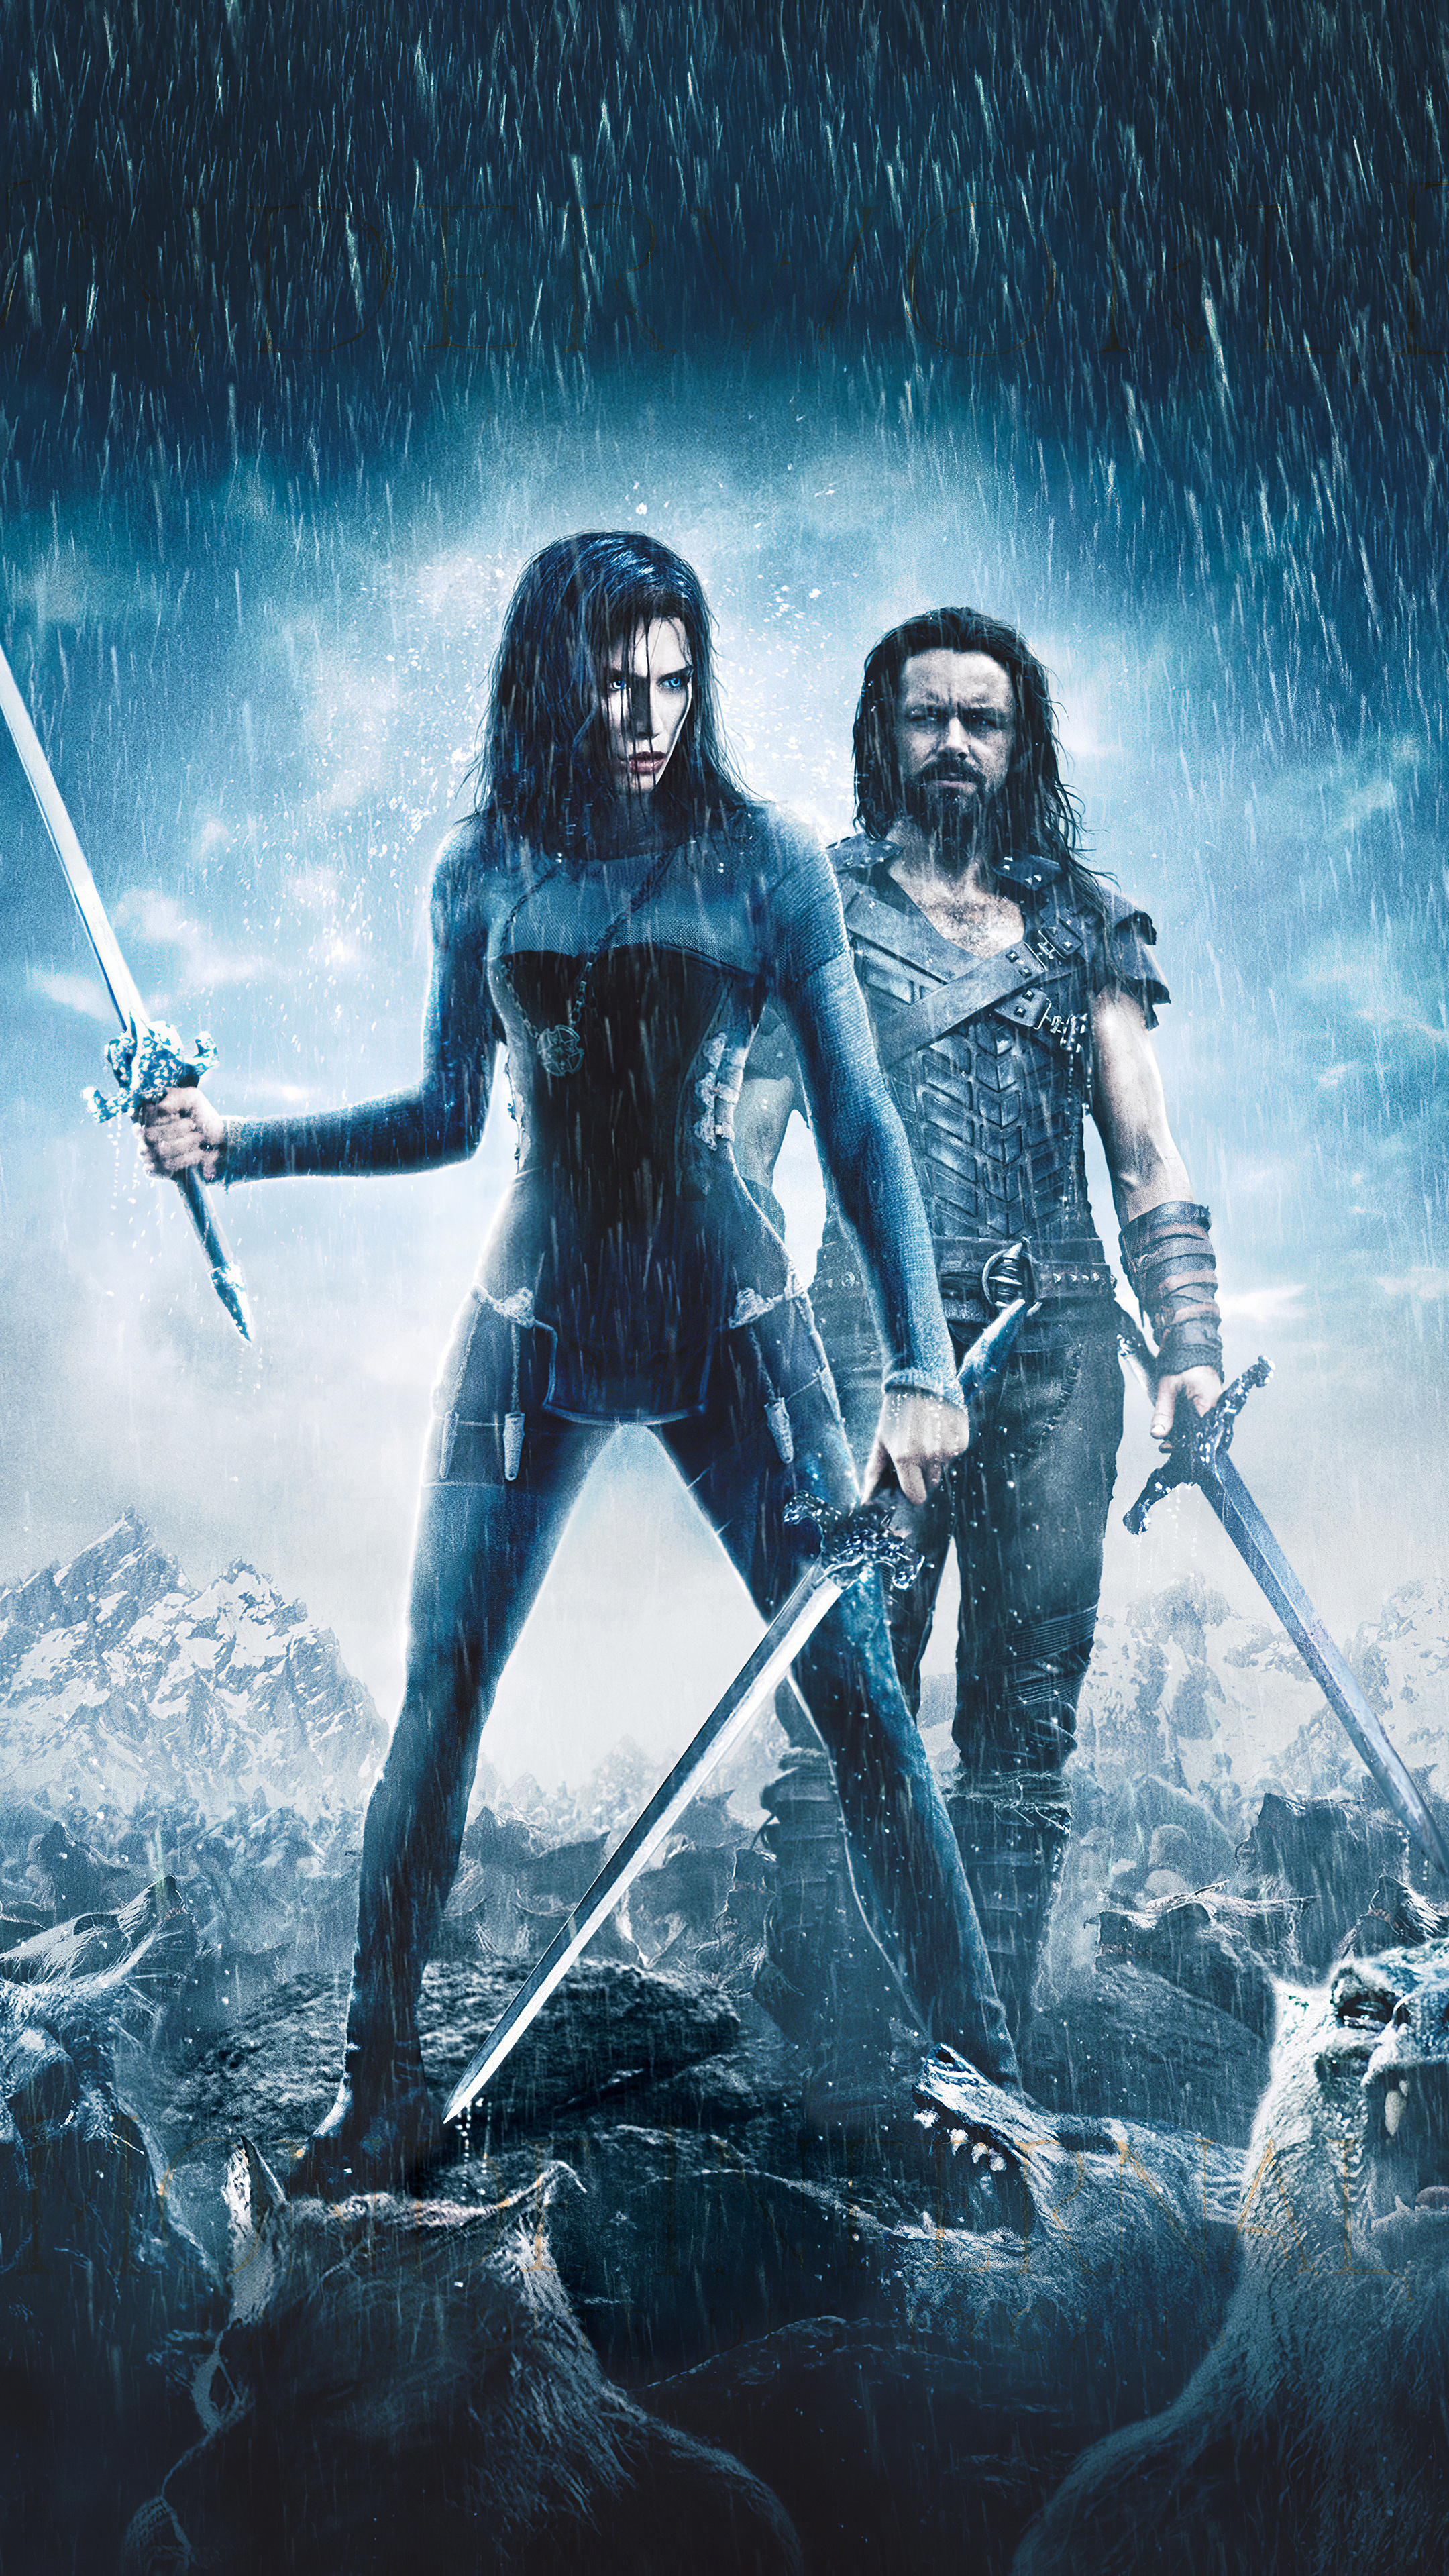 Underworld Rise of the Lycans 4K, Sony Xperia X, Ultra HD resolution, Immersive graphics, 2160x3840 4K Phone